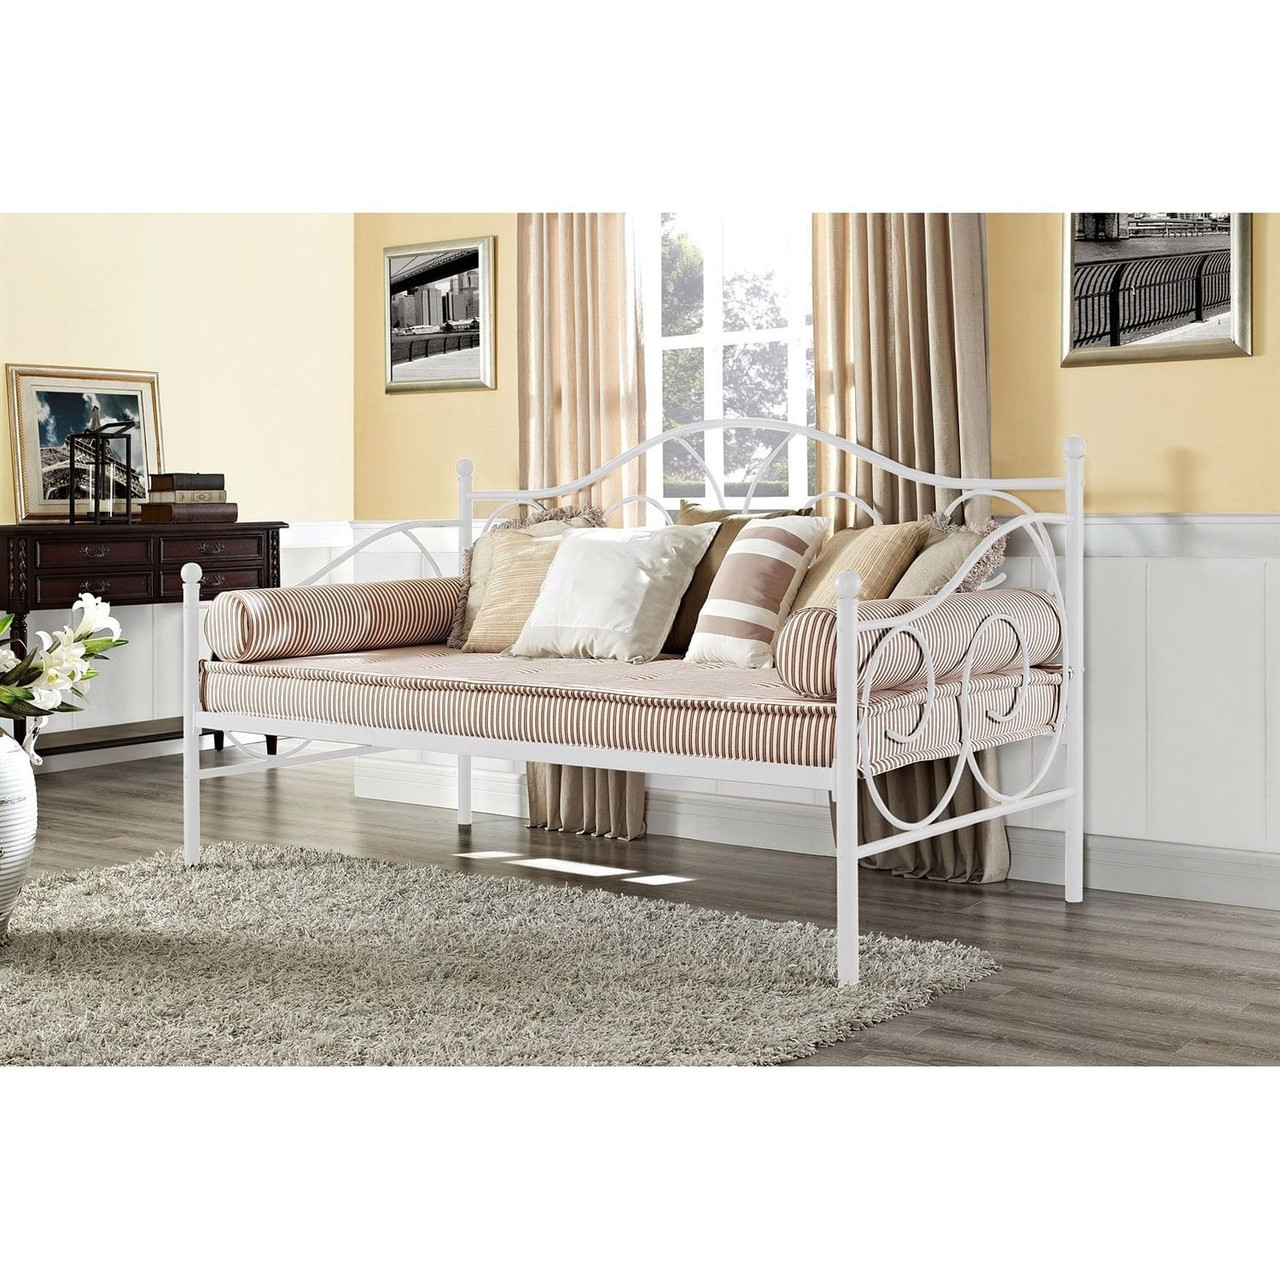 Twin White Metal Daybed with Scrolling Final Detailing - 400 lb Weight Limit